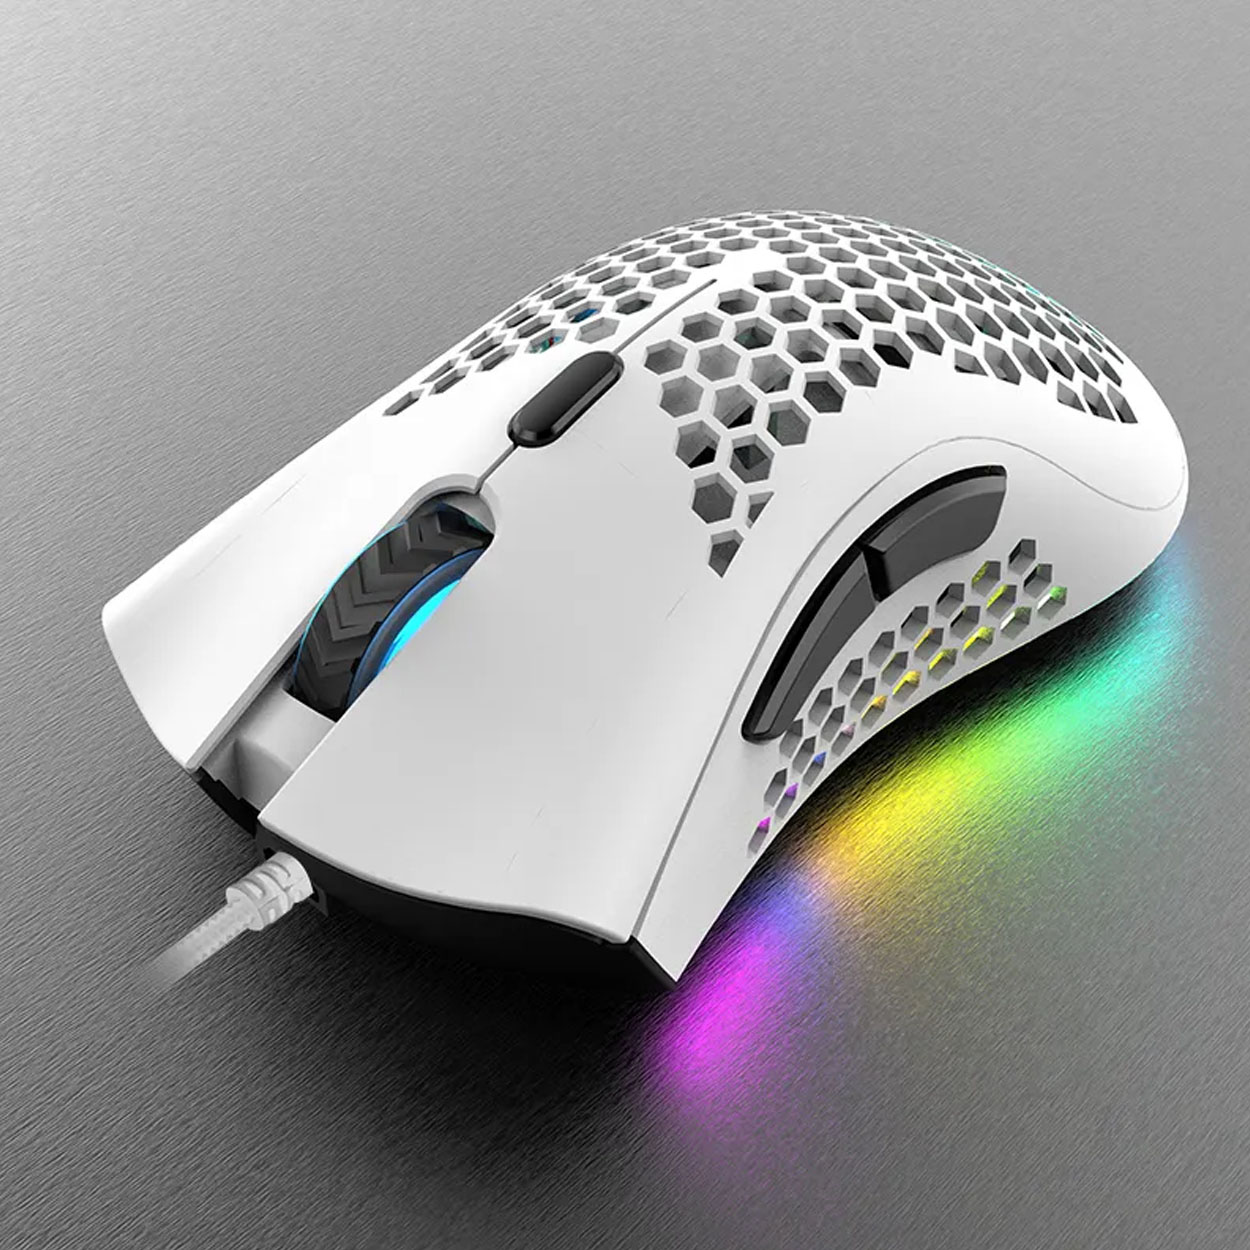  Honeycomb Wired Gaming Mouse, RGB Backlight and 7200 Adjustable  DPI, Ergonomic and Lightweight USB Computer Mouse with High Precision  Sensor for Windows PC & Laptop Gamers (Ceramic White) : Video Games